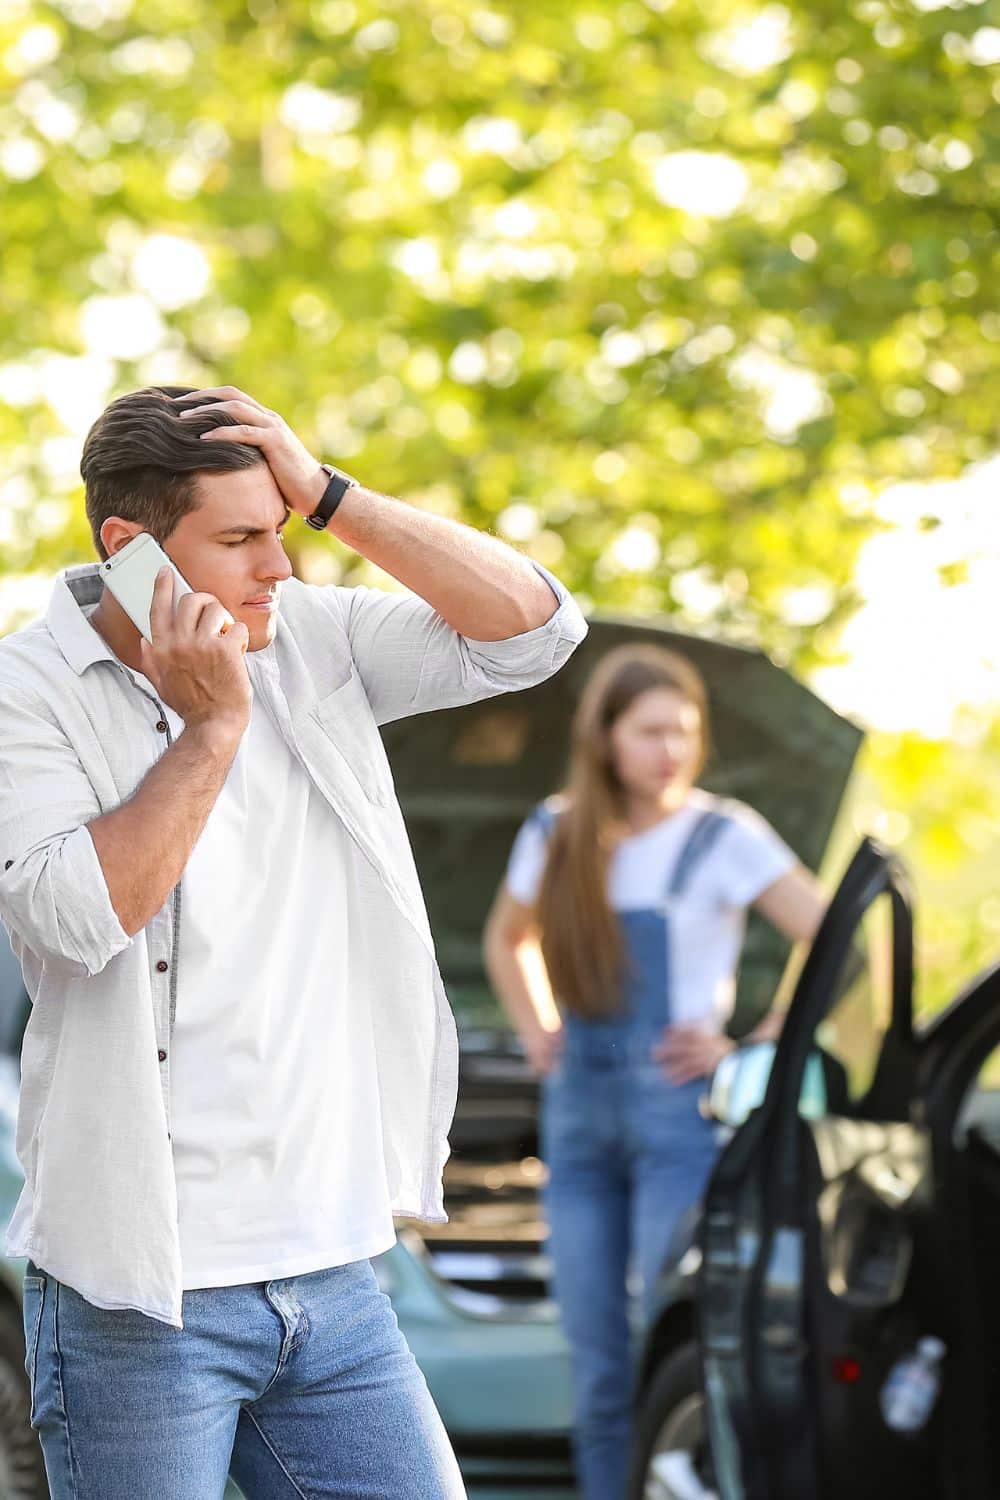 Distracted Driving - The Number One Cause of Collisions